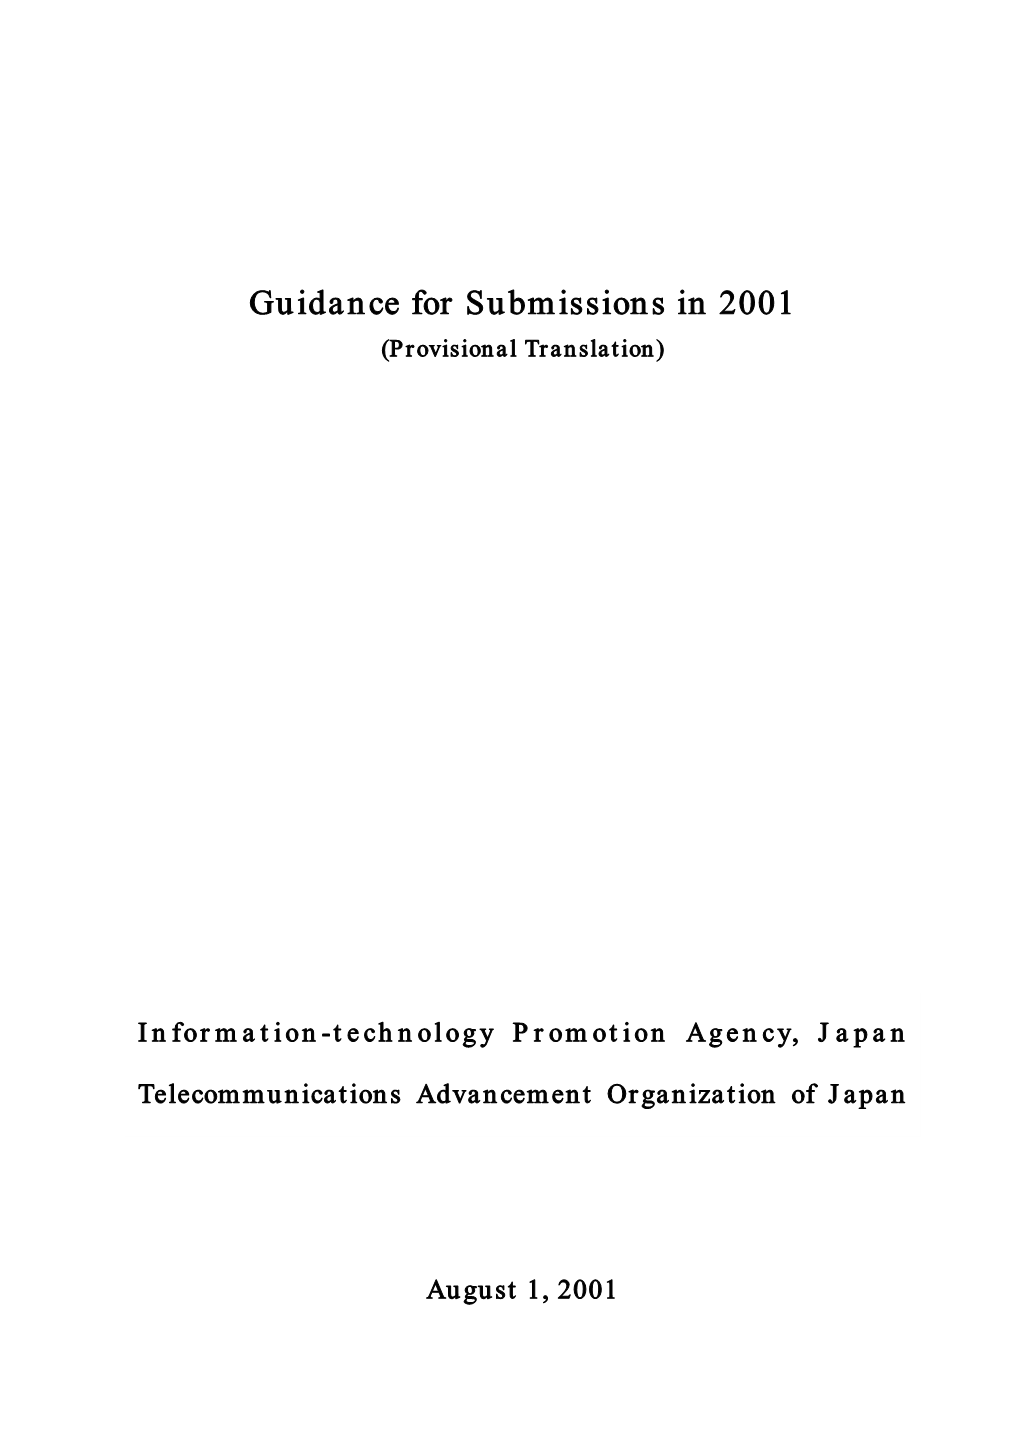 Guidance for Submissions(104